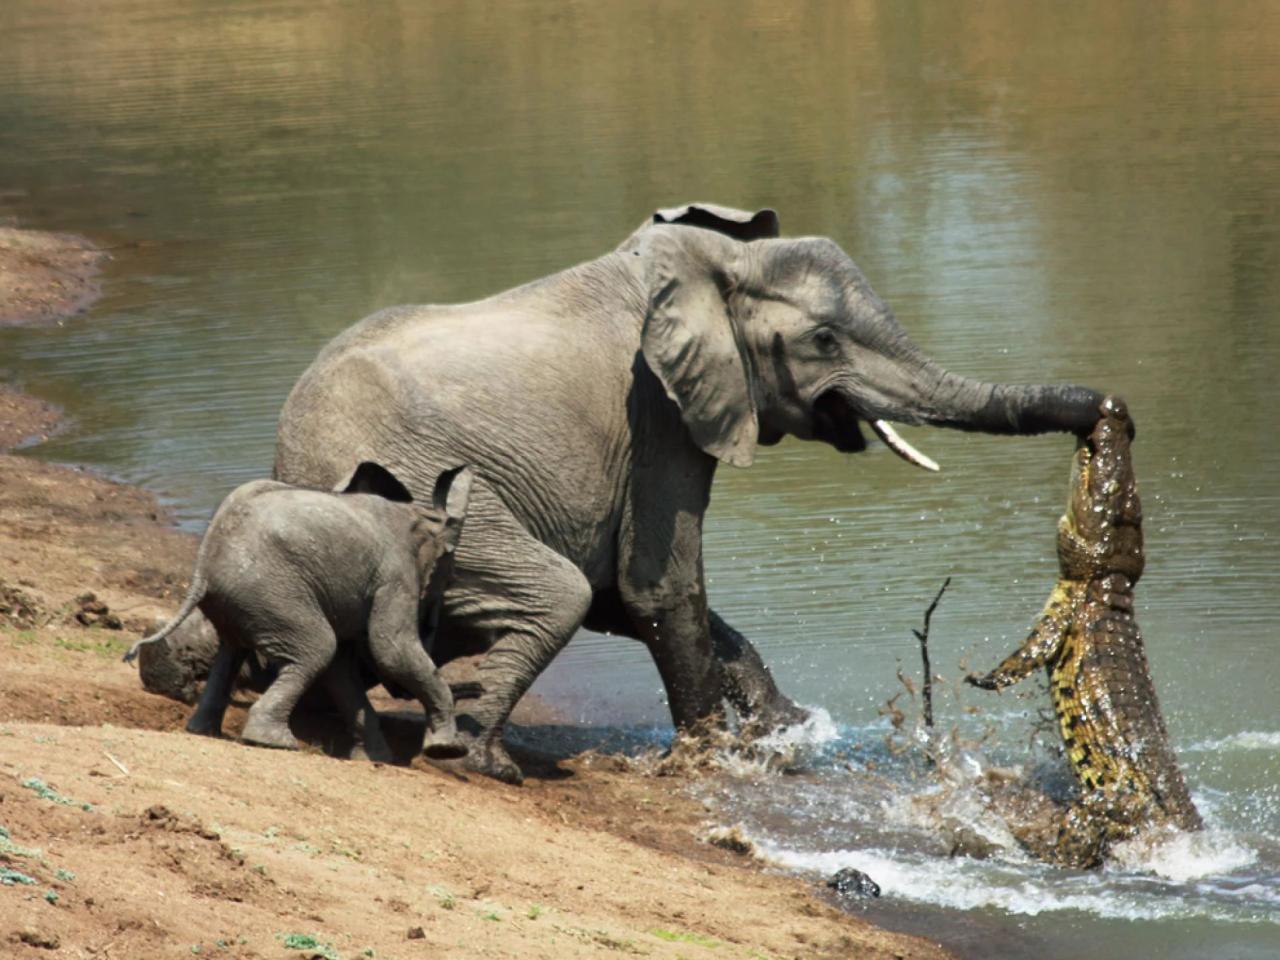 unstoppable maternal instinct mother elephant to protect her young from crocodile attack 5519 2